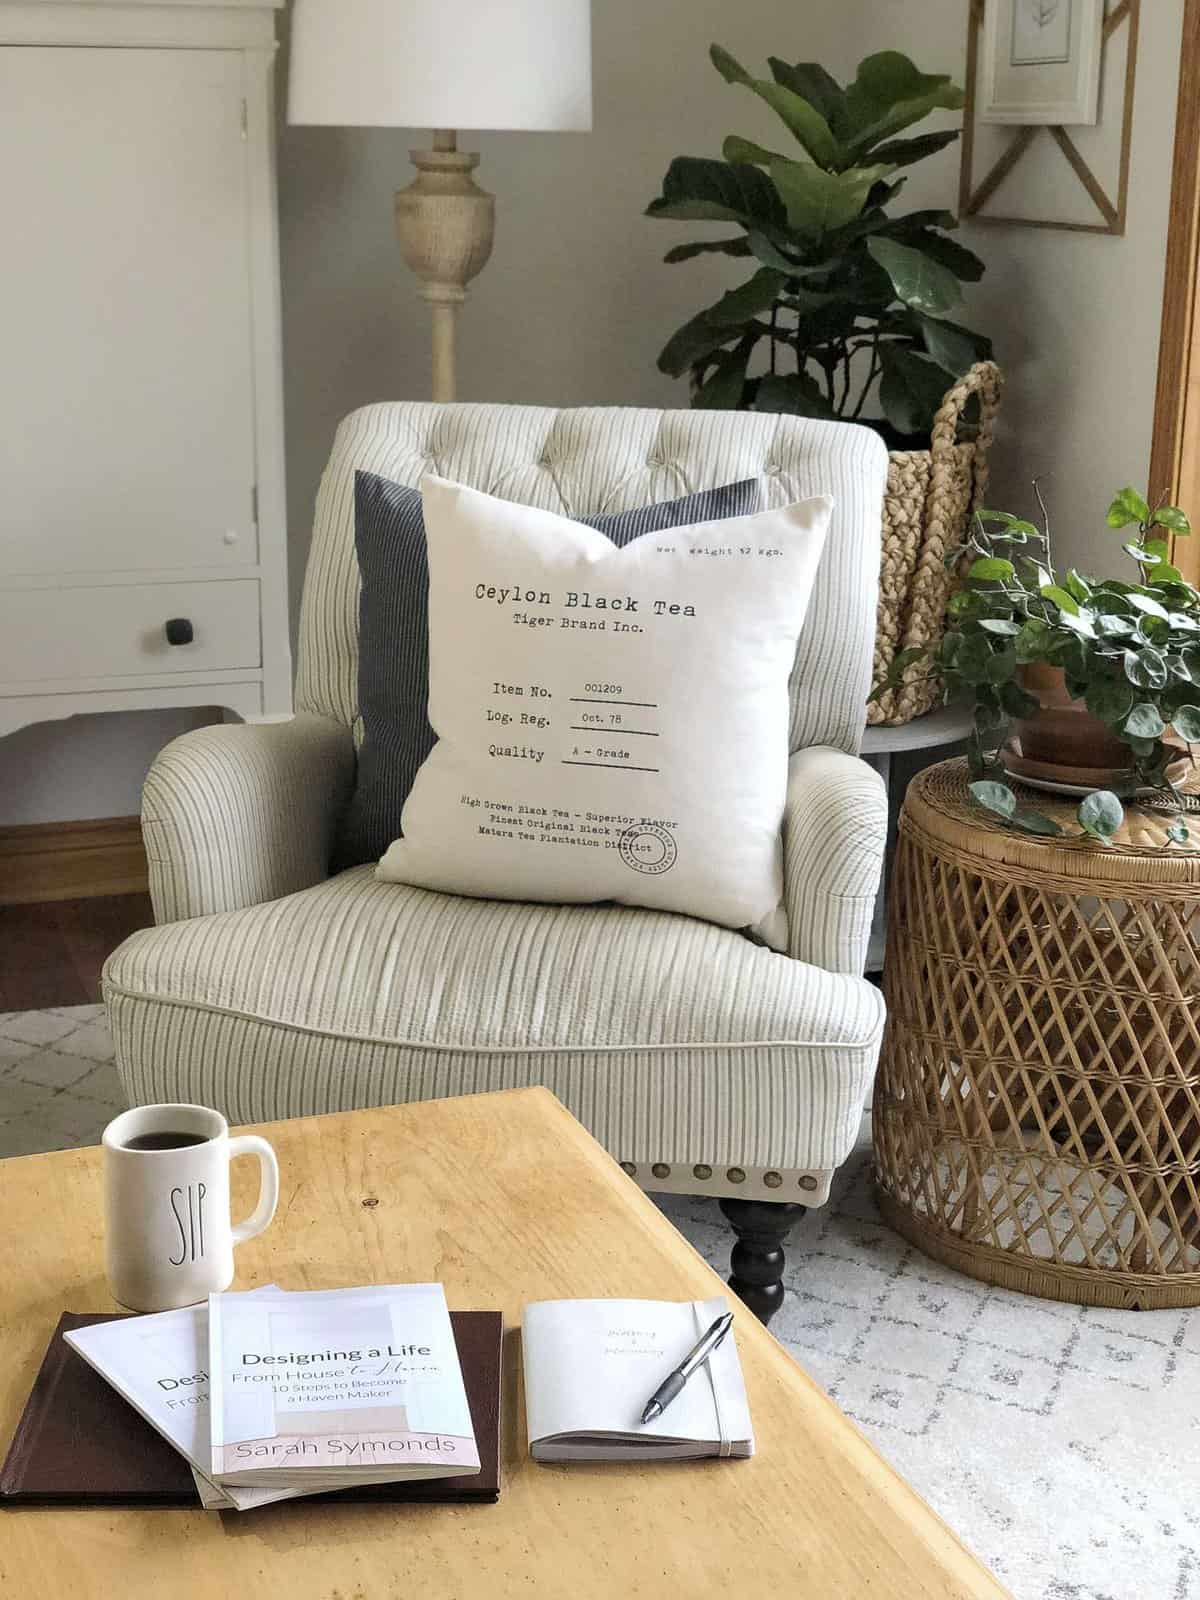 Are you ready to make your house into a haven? With my interior design book, Designing a Life: From House to Haven, learn 10 steps to become a haven maker.